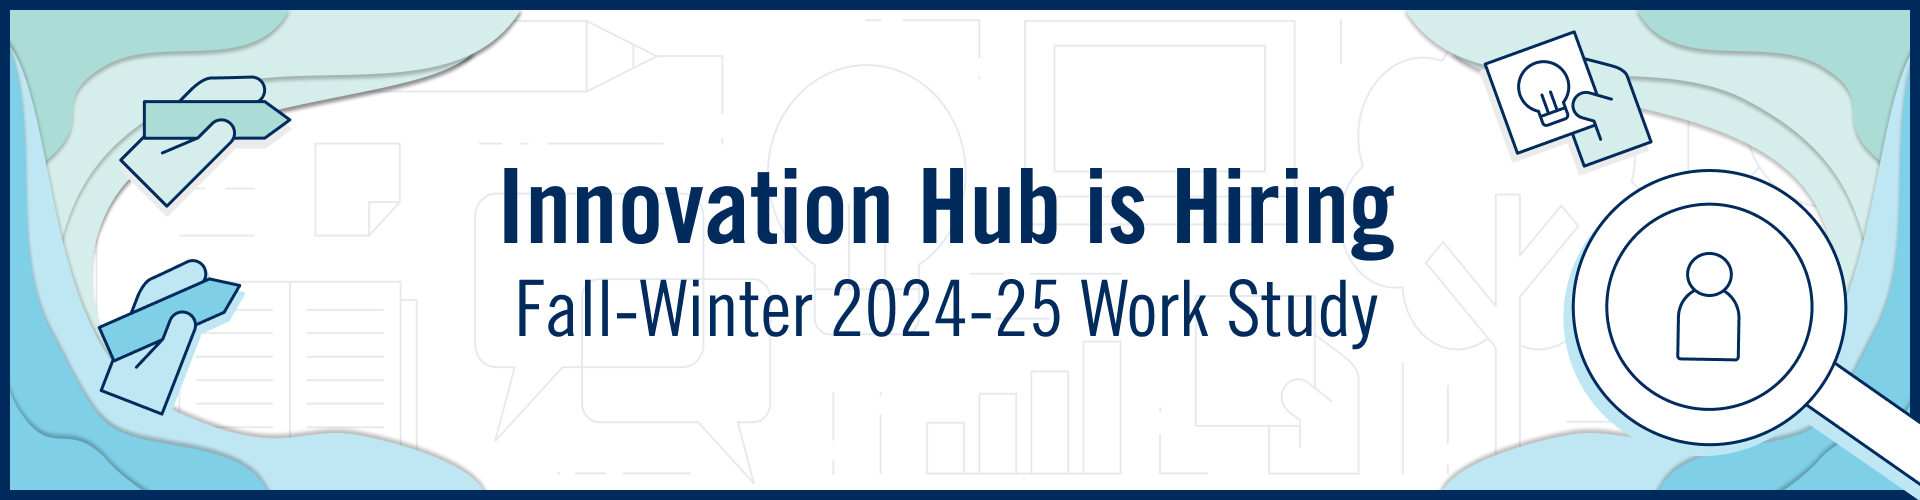 Blue and green banner that reads 'Innovation Hub is Hiring Fall-Winter 2024-25 Work Study'